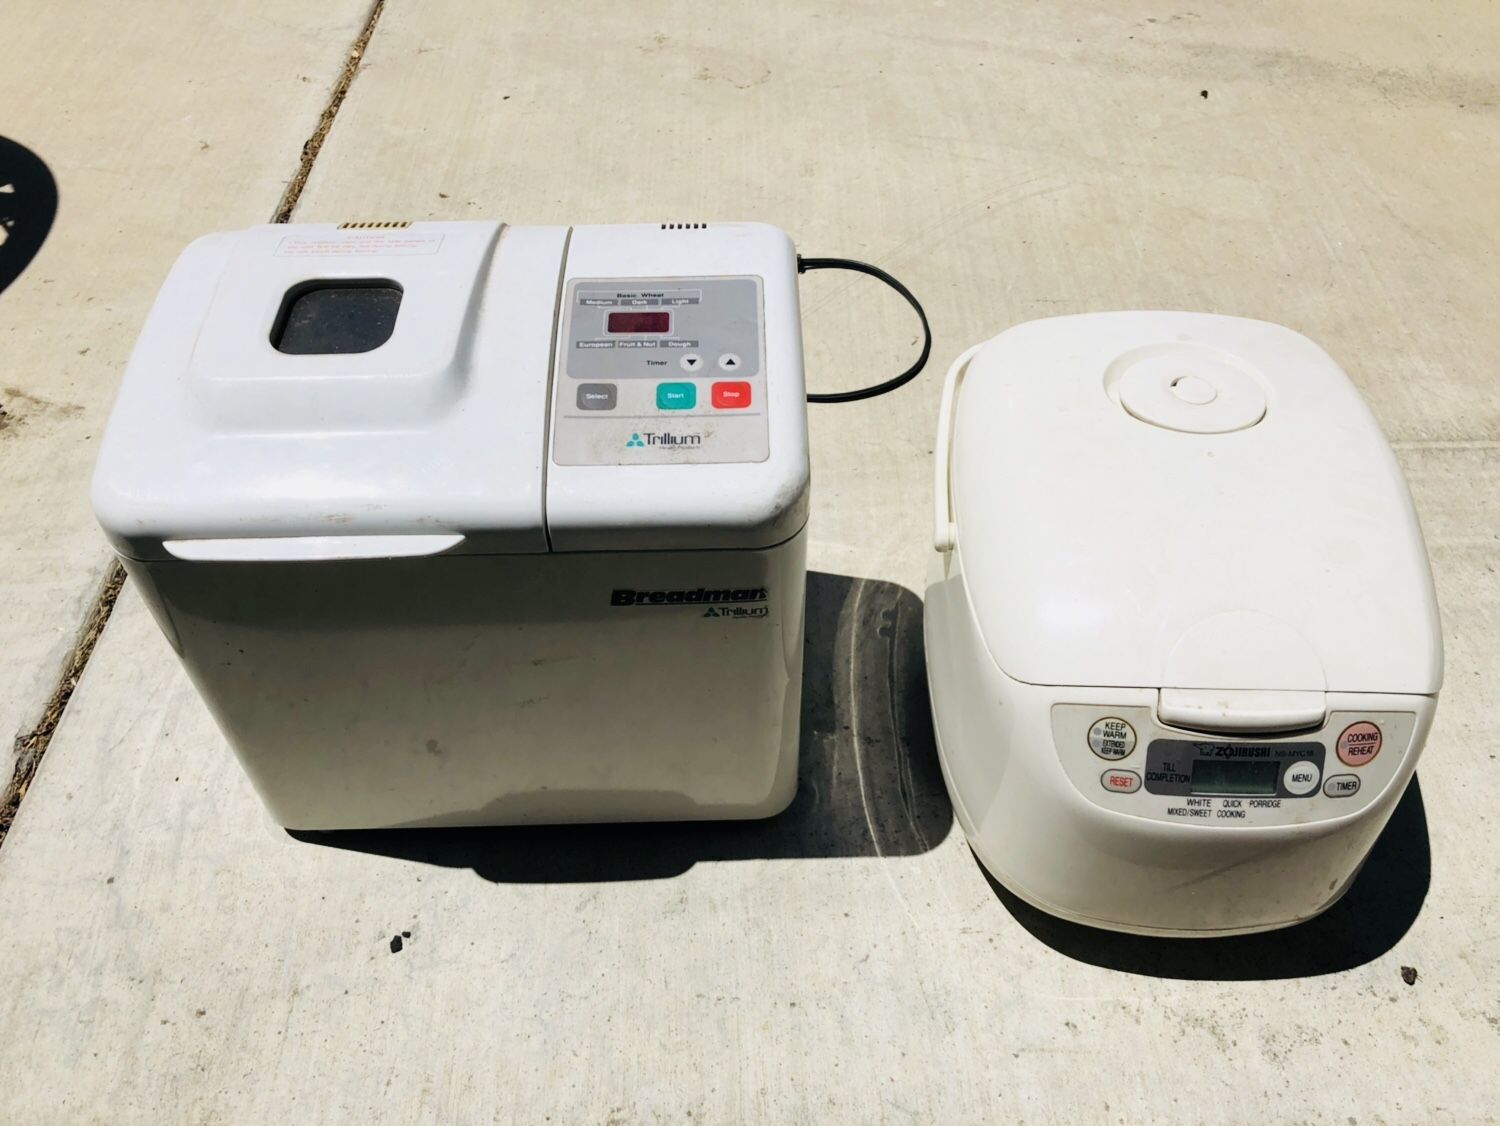 Rice maker, and bread maker